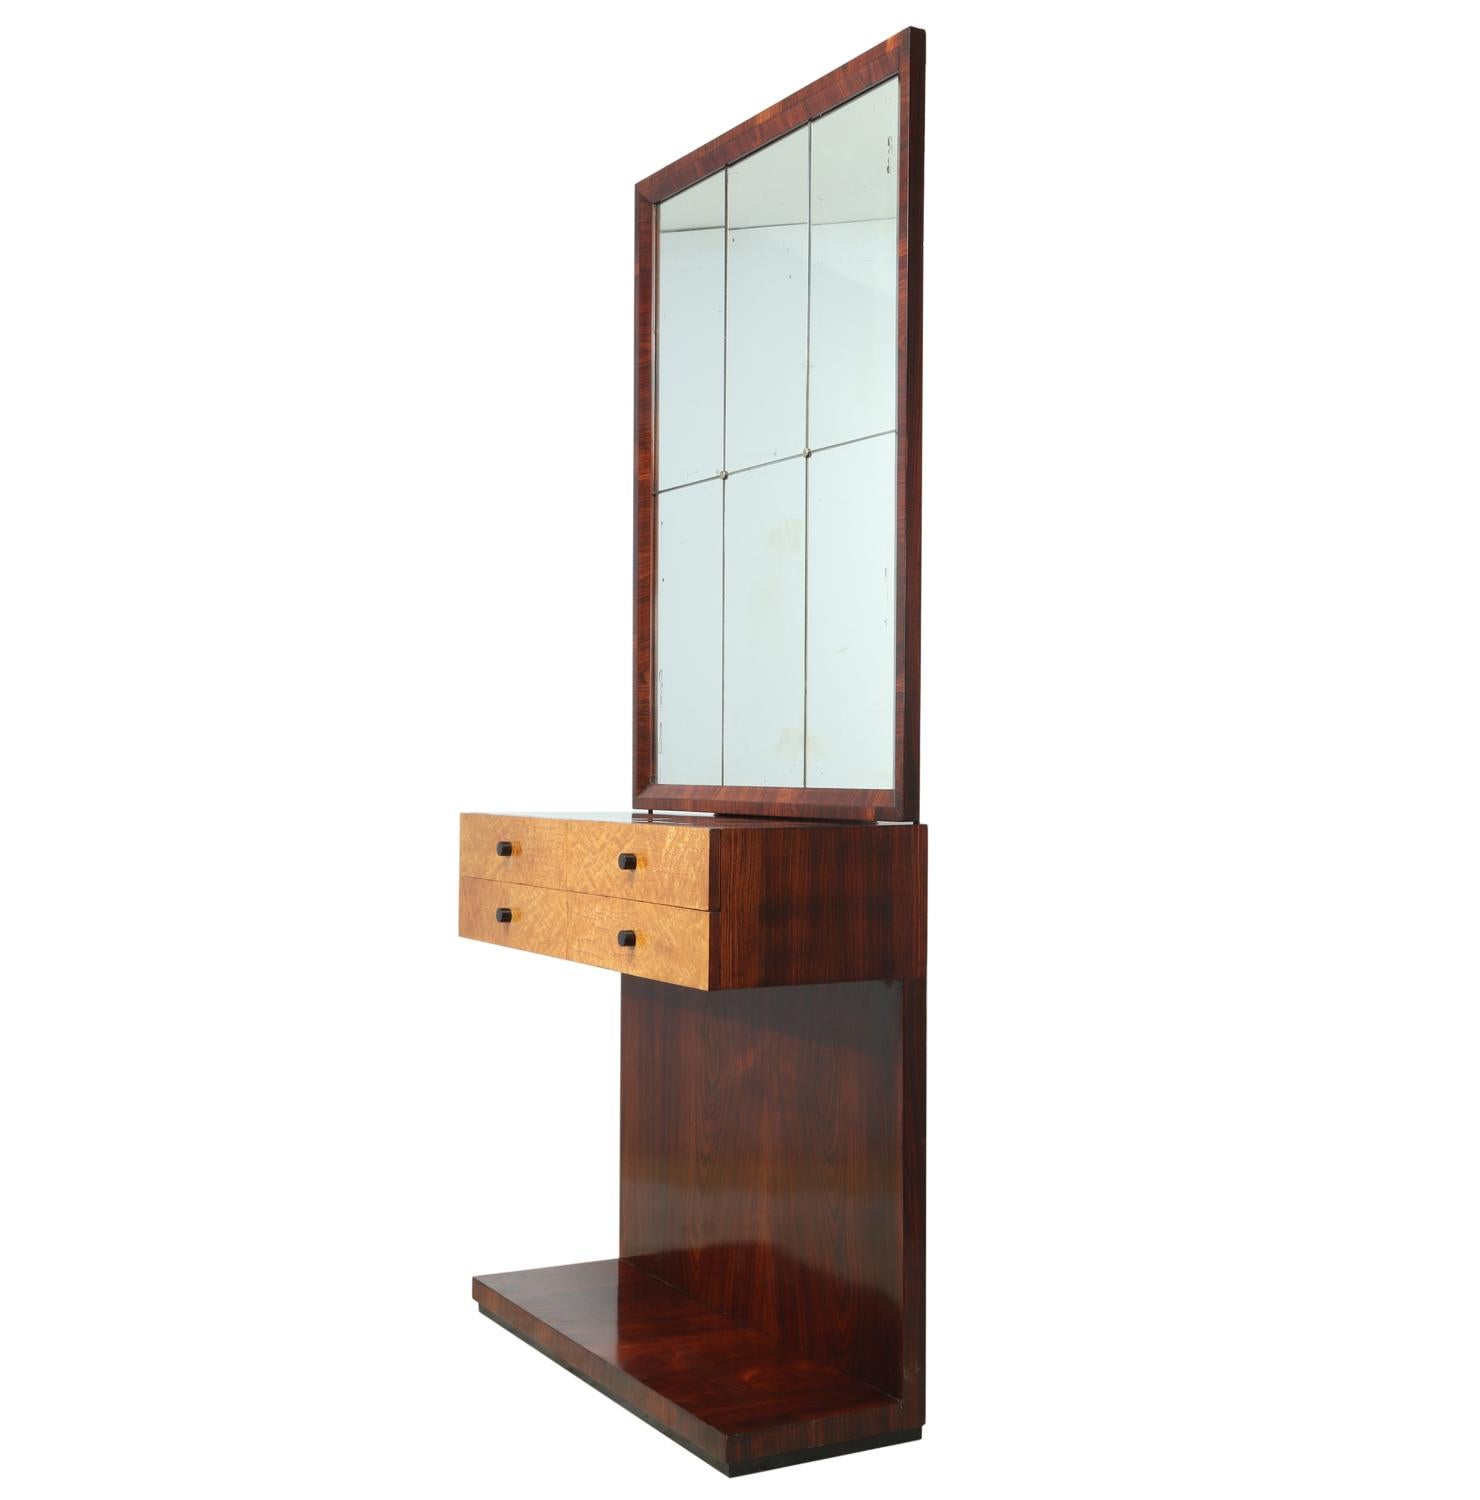 Italian Art Deco console table with mirror, circa 1930
A very stylish Art Deco rosewood and bird's-eye maple console table with rosewood mirror above, this has four drawers and black wooden handles, the console and mirror frame has been fully